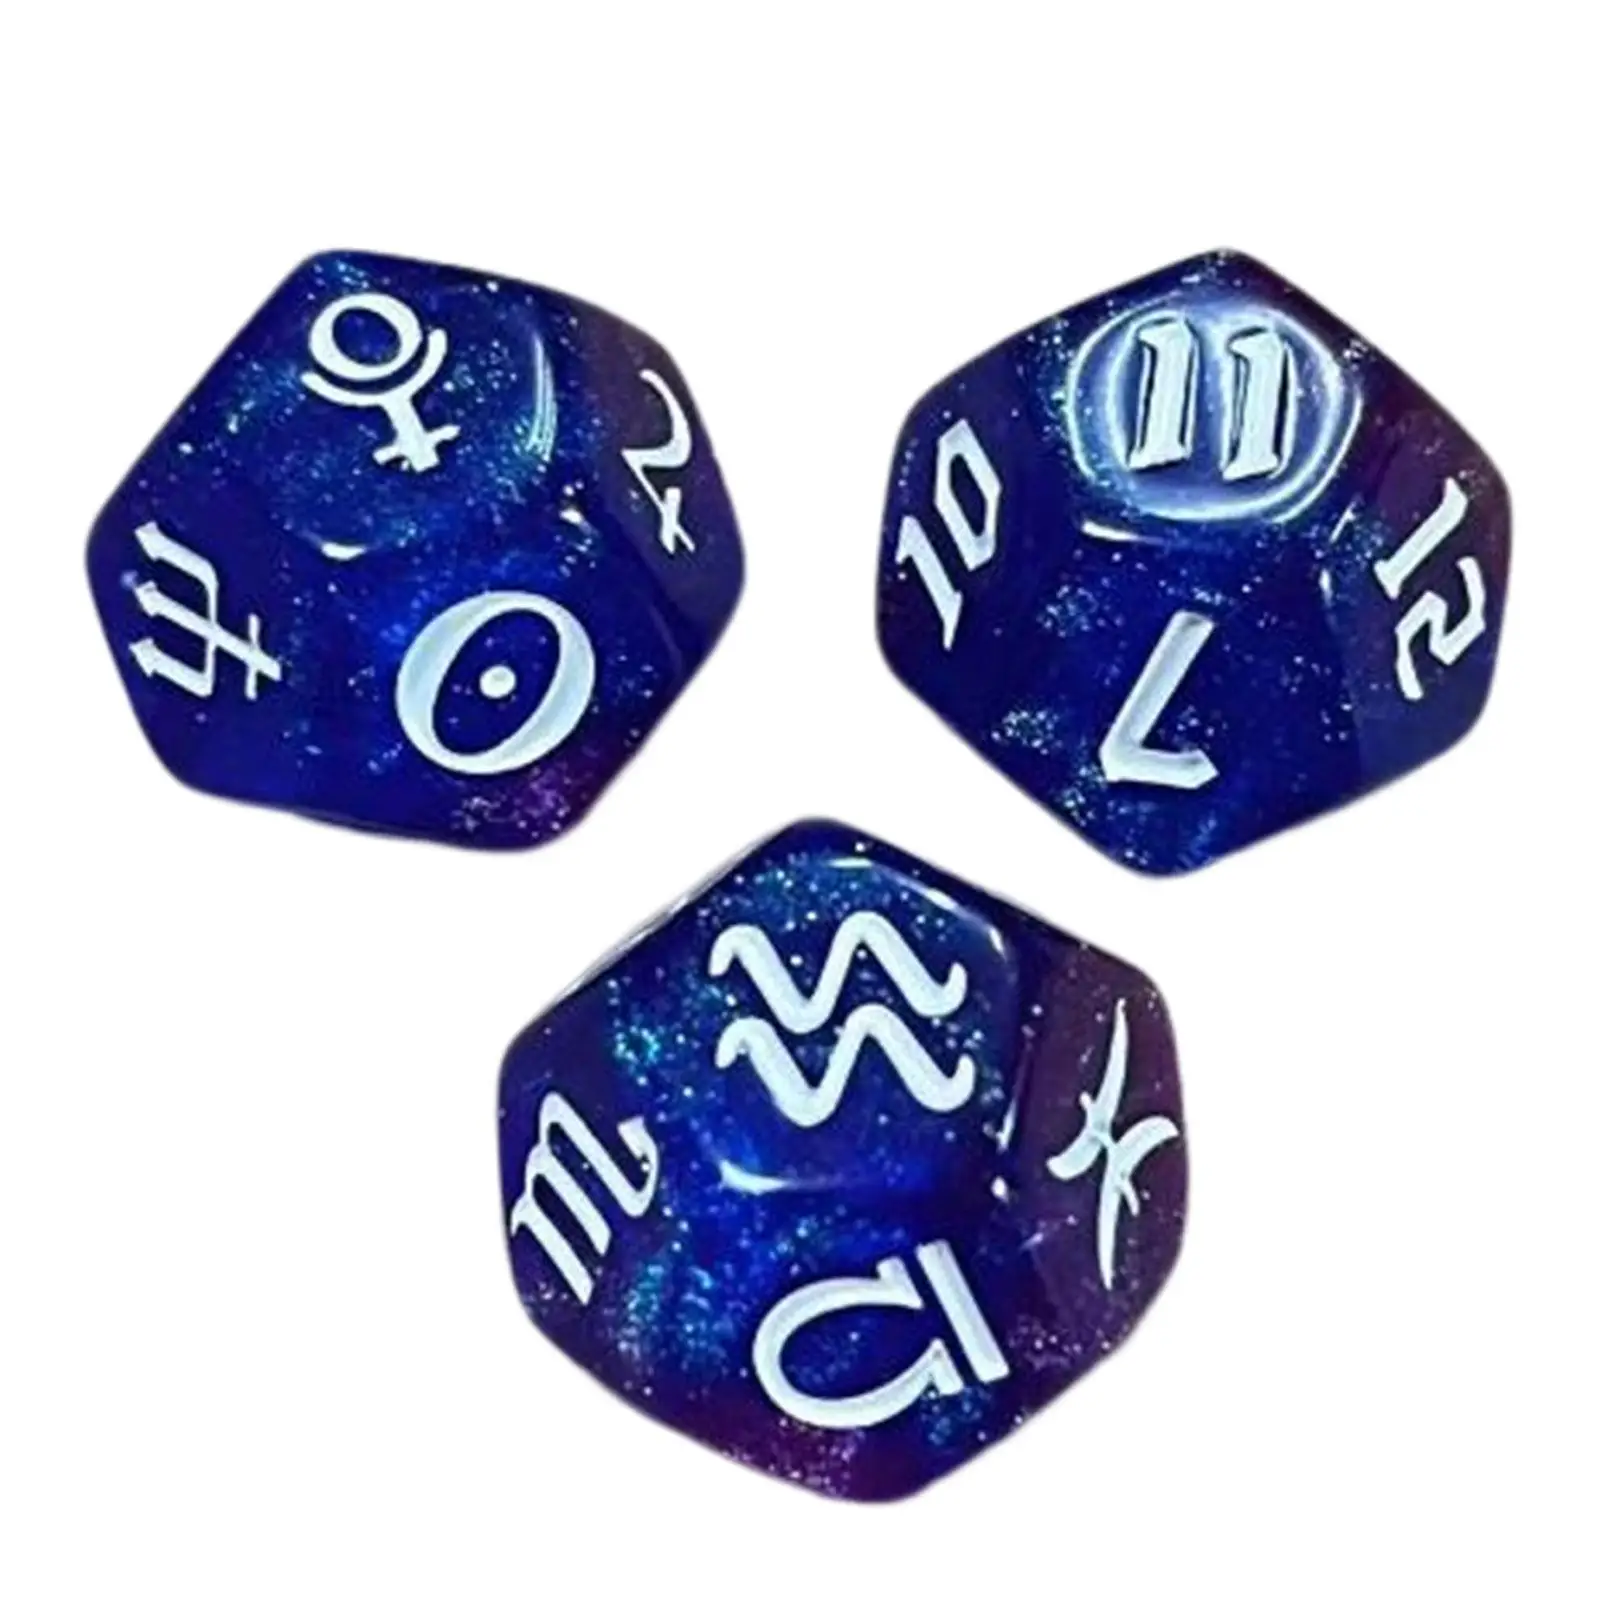 3Pcs Multi Sided Dices Constellation Sign Dice Polyhedral Dice Set for Family Gathering Constellation Accessory